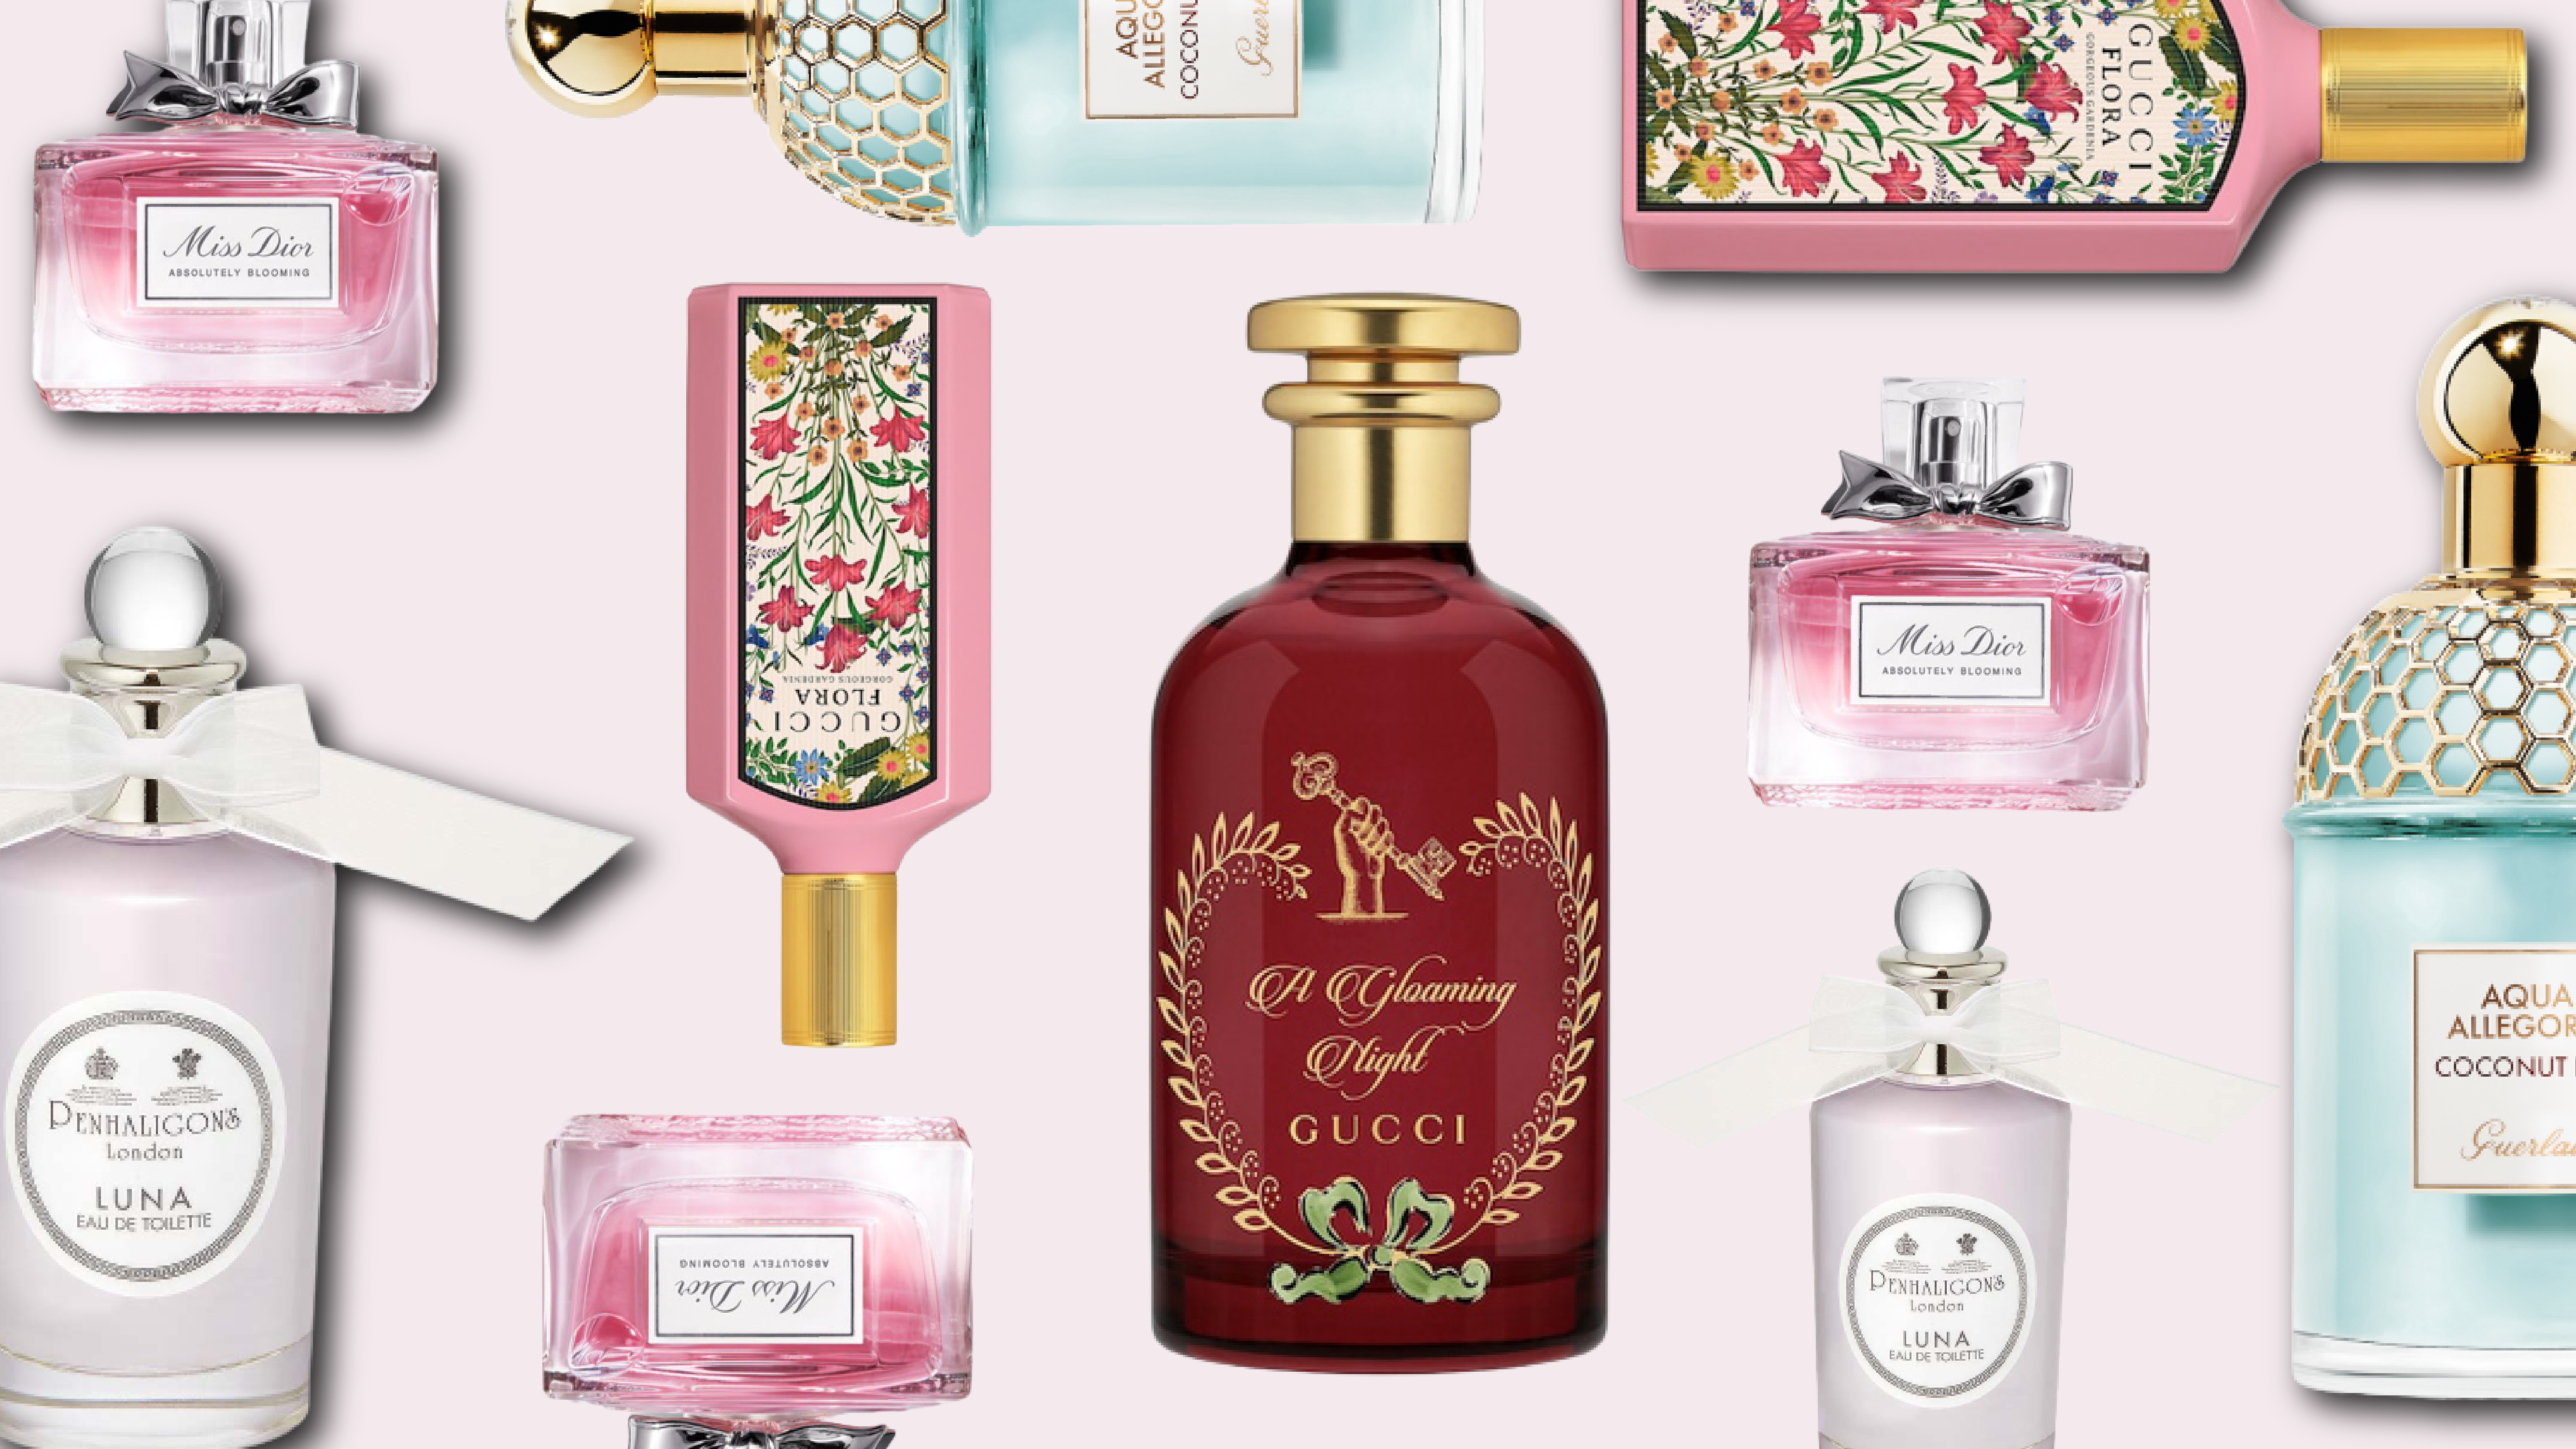 How to Find a Fragrance That Suits Your Lifestyle